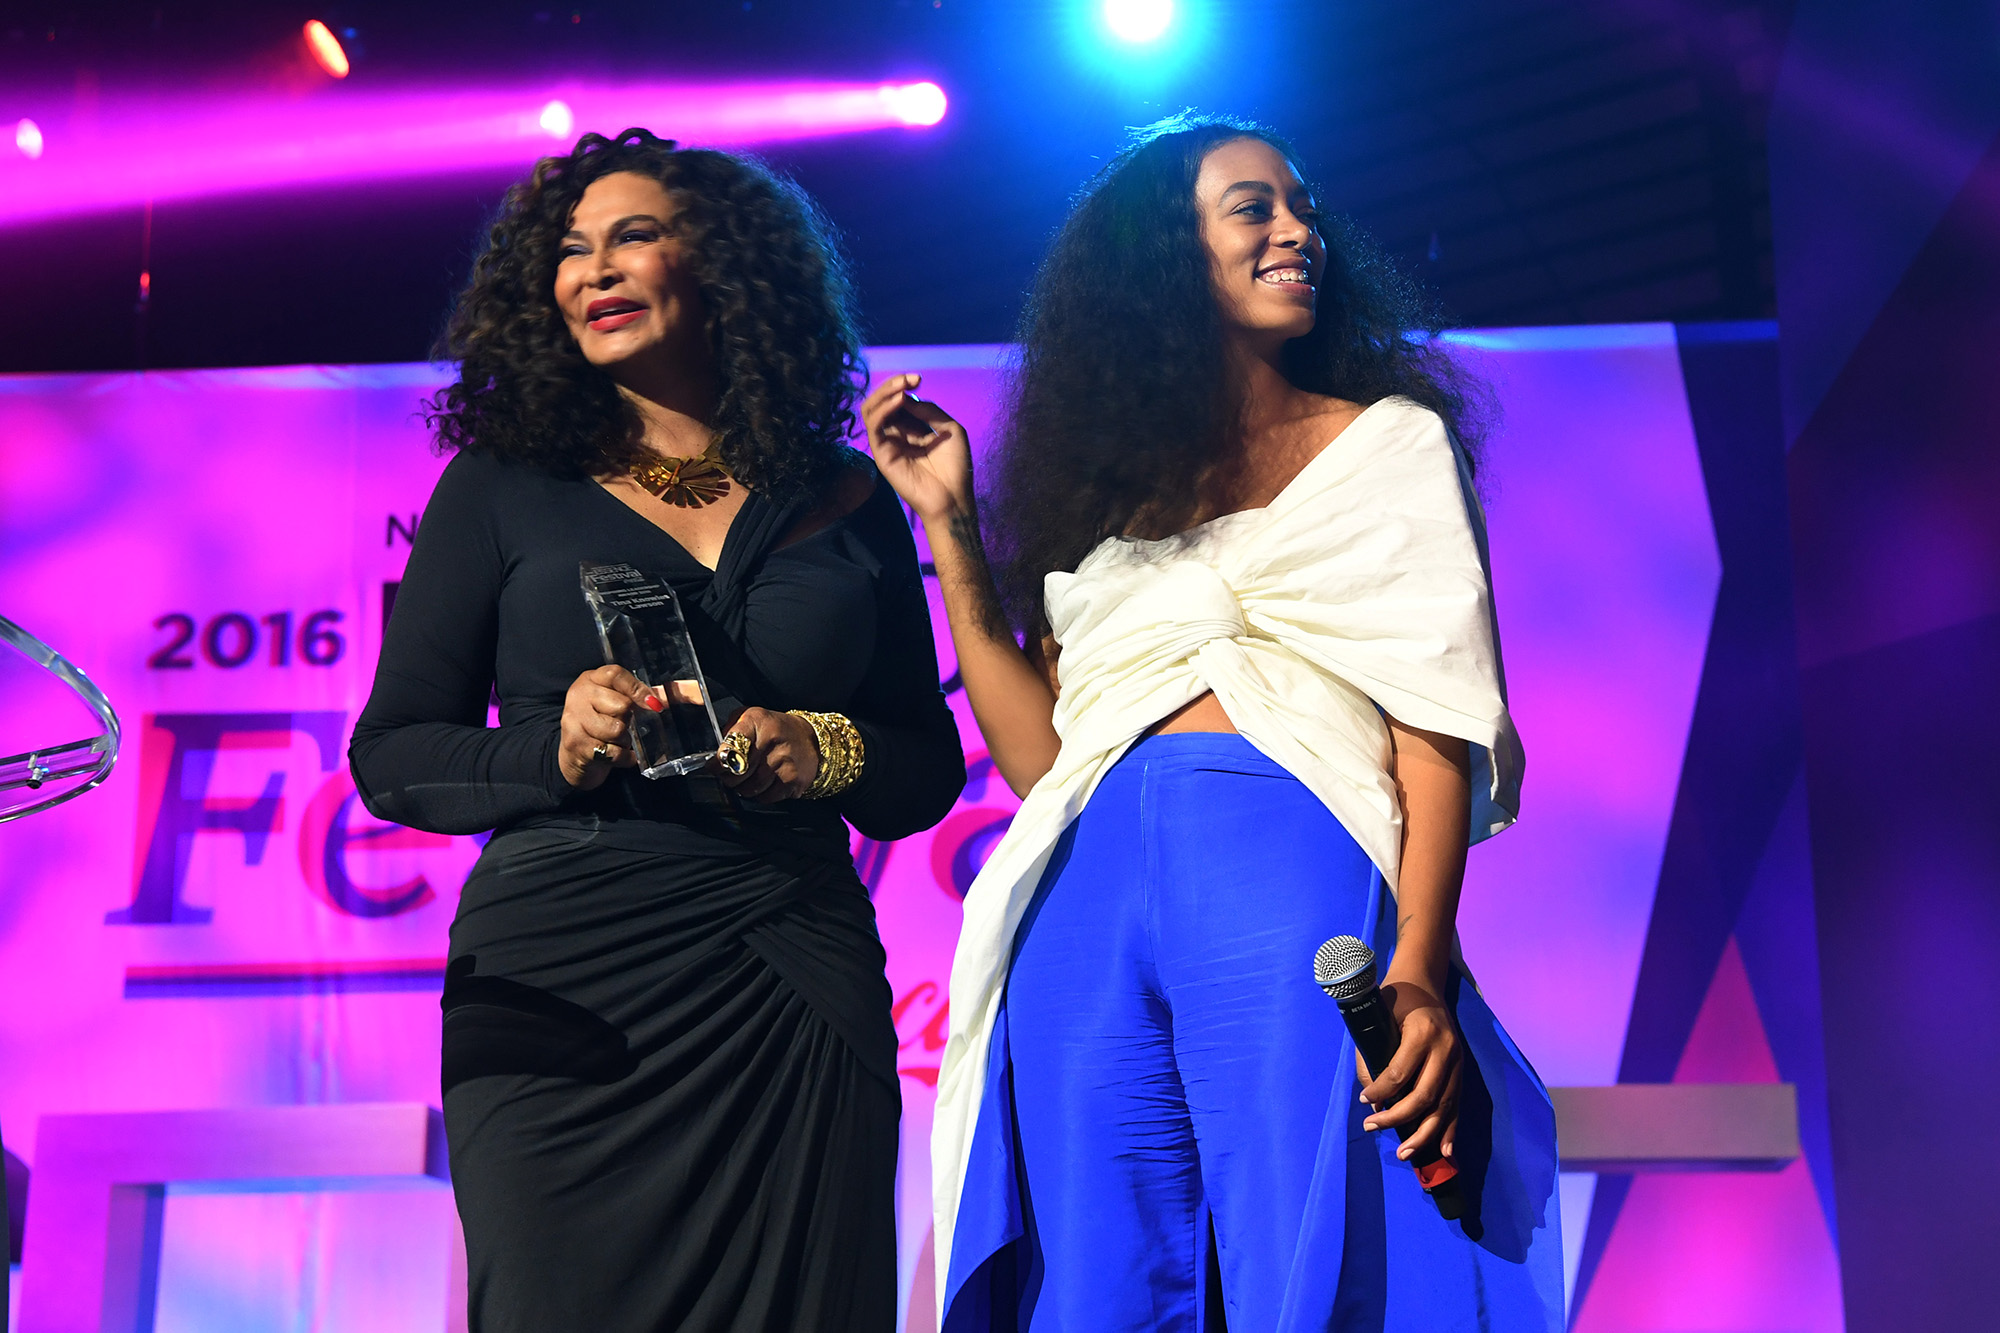 Tina Lawson Knowles and singer Solange Knowles speak on stage at the 2016 ESSENCE Festival in New Orleans, Louisiana.  (Photo by Paras Griffin/Getty Images for 2016 Essence Festival) (Paras Griffin&mdash;Getty Images for 2016 Essence Fe)